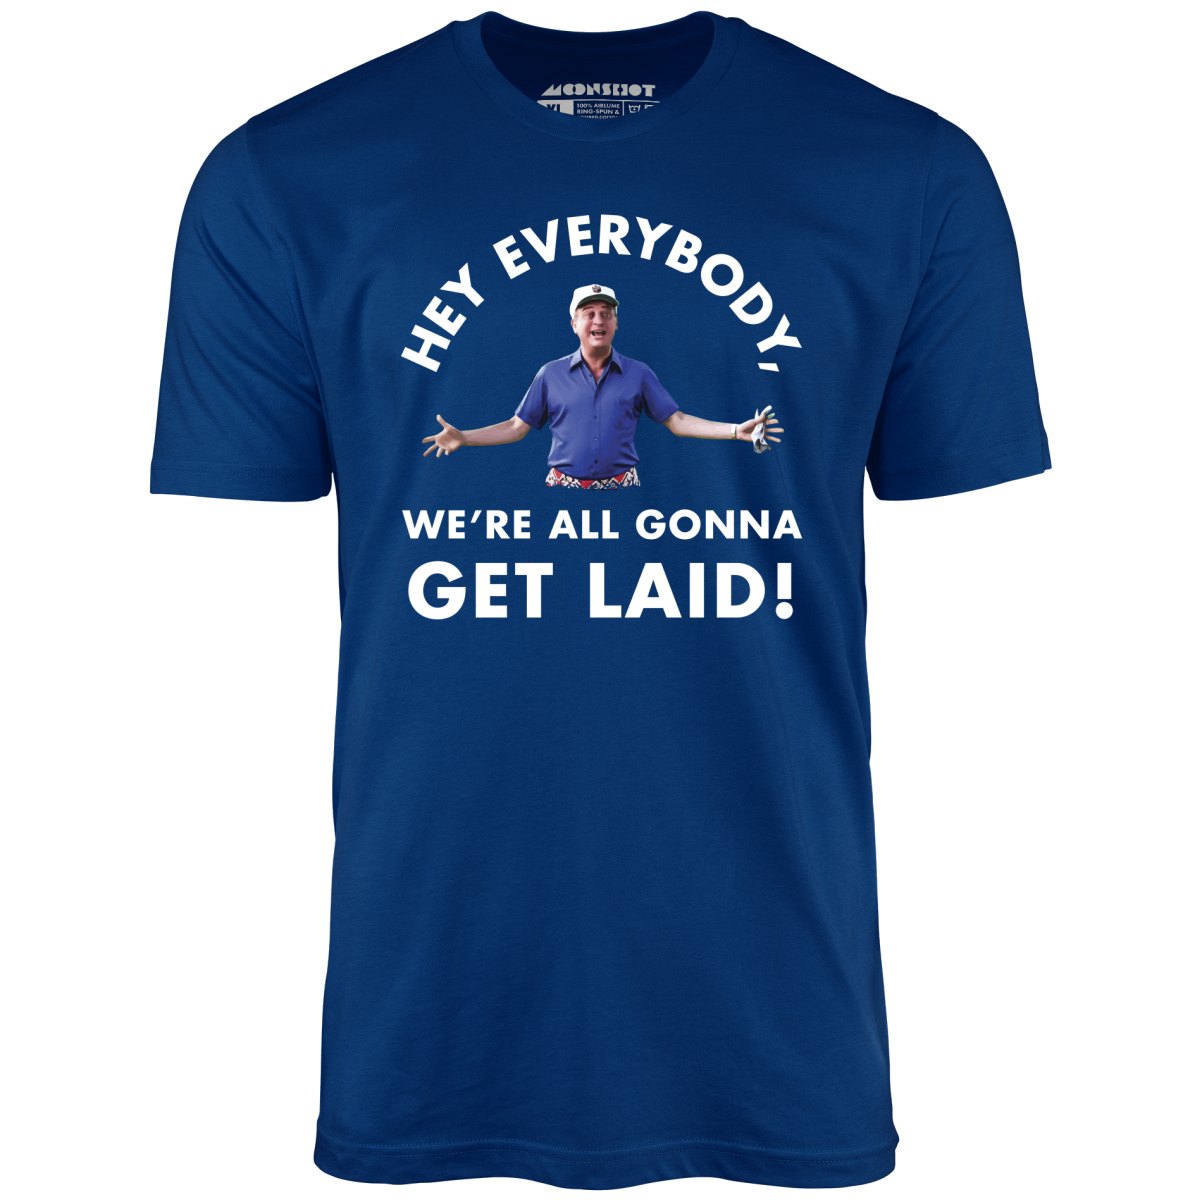 Hey Everybody, We're All Gonna Get Laid! - Unisex T-Shirt